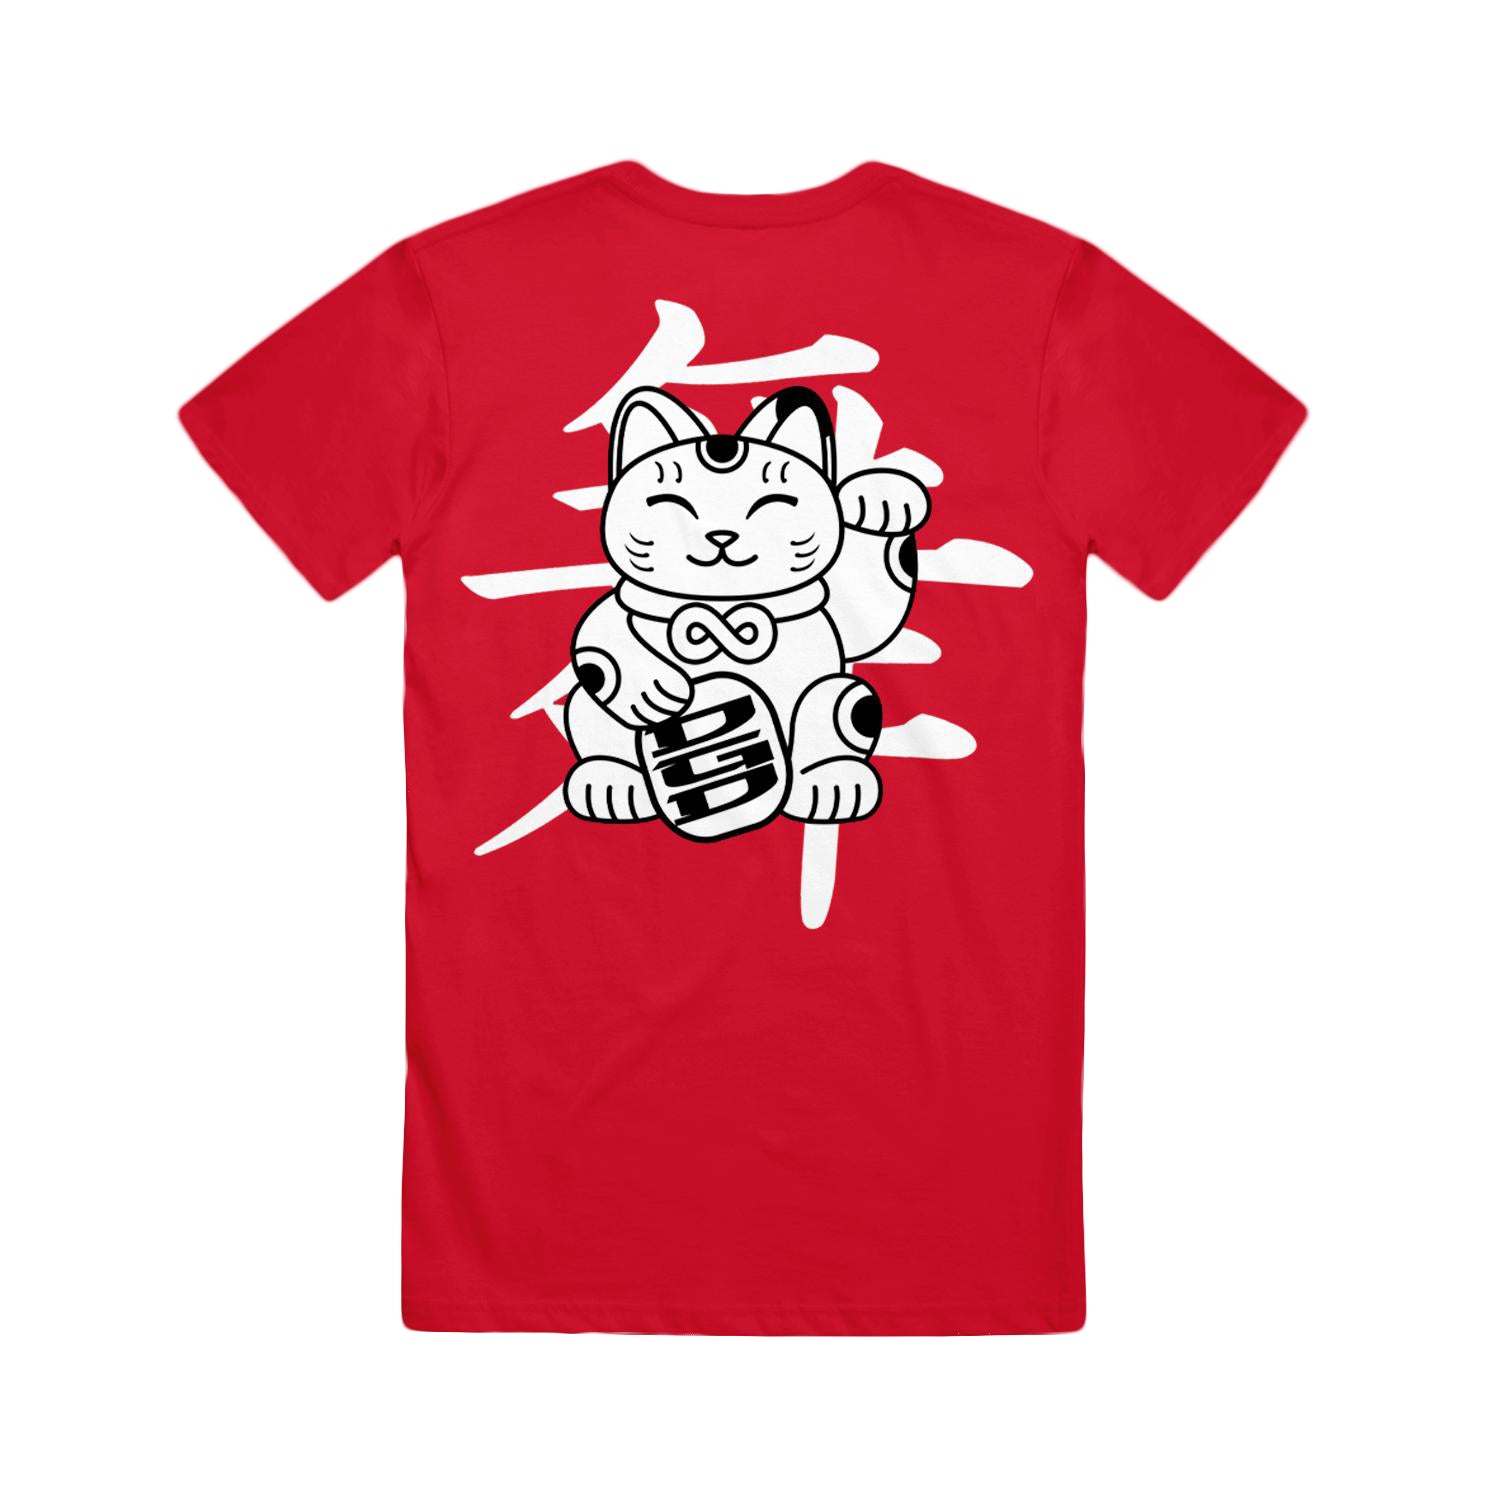 back on red tee on white background with full back print of white cat and black outline waving with left hand holding a D G D in right hand 